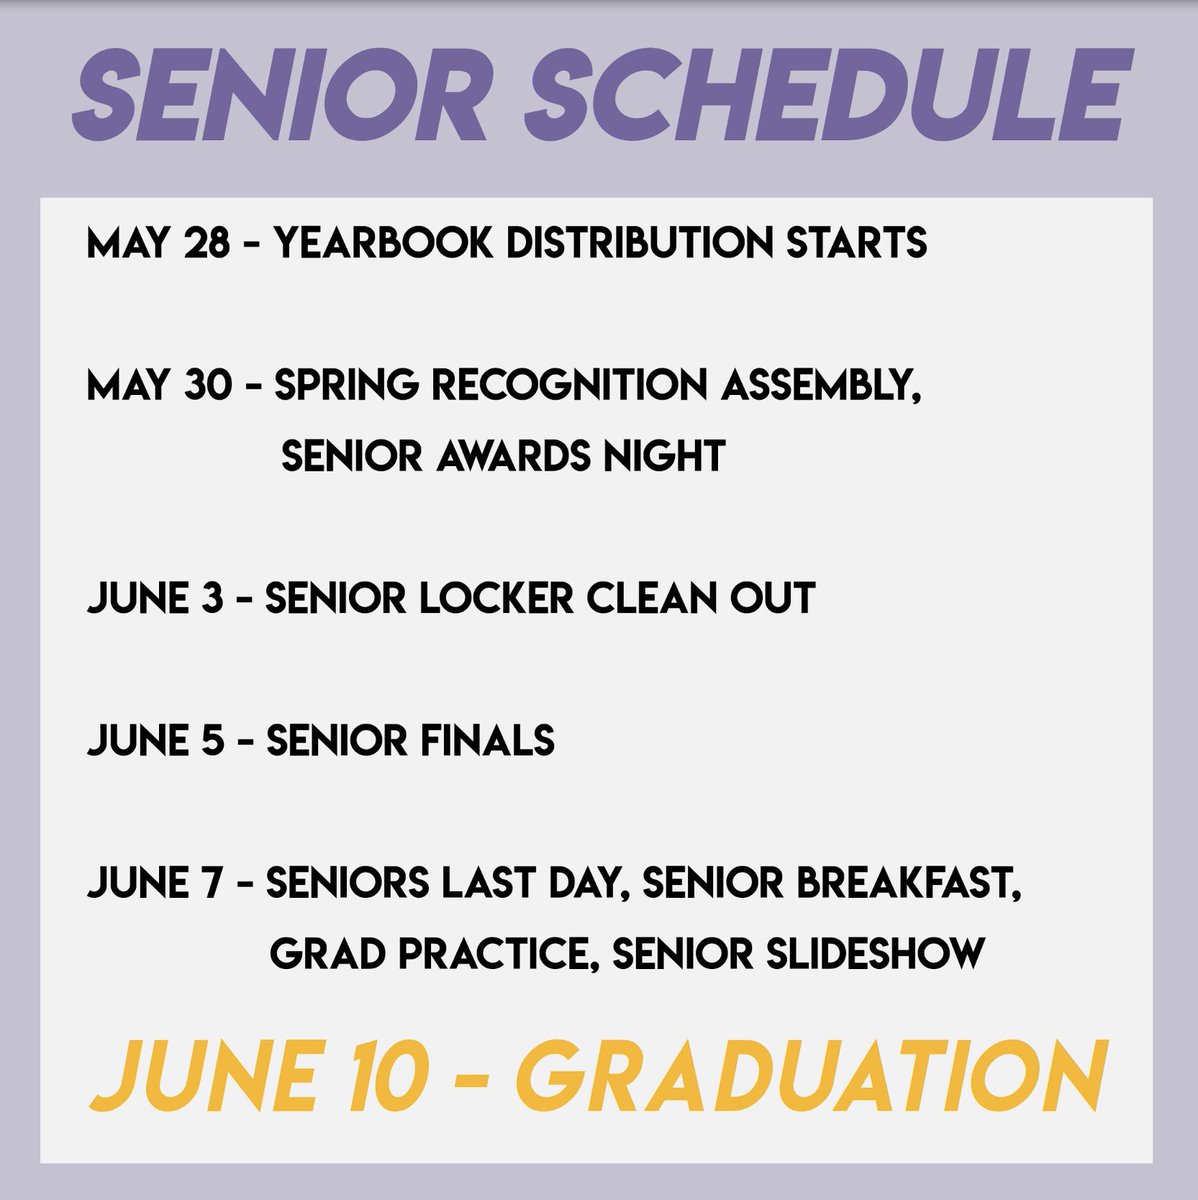 Hey seniors! Here is an updated schedule for the last week of school!